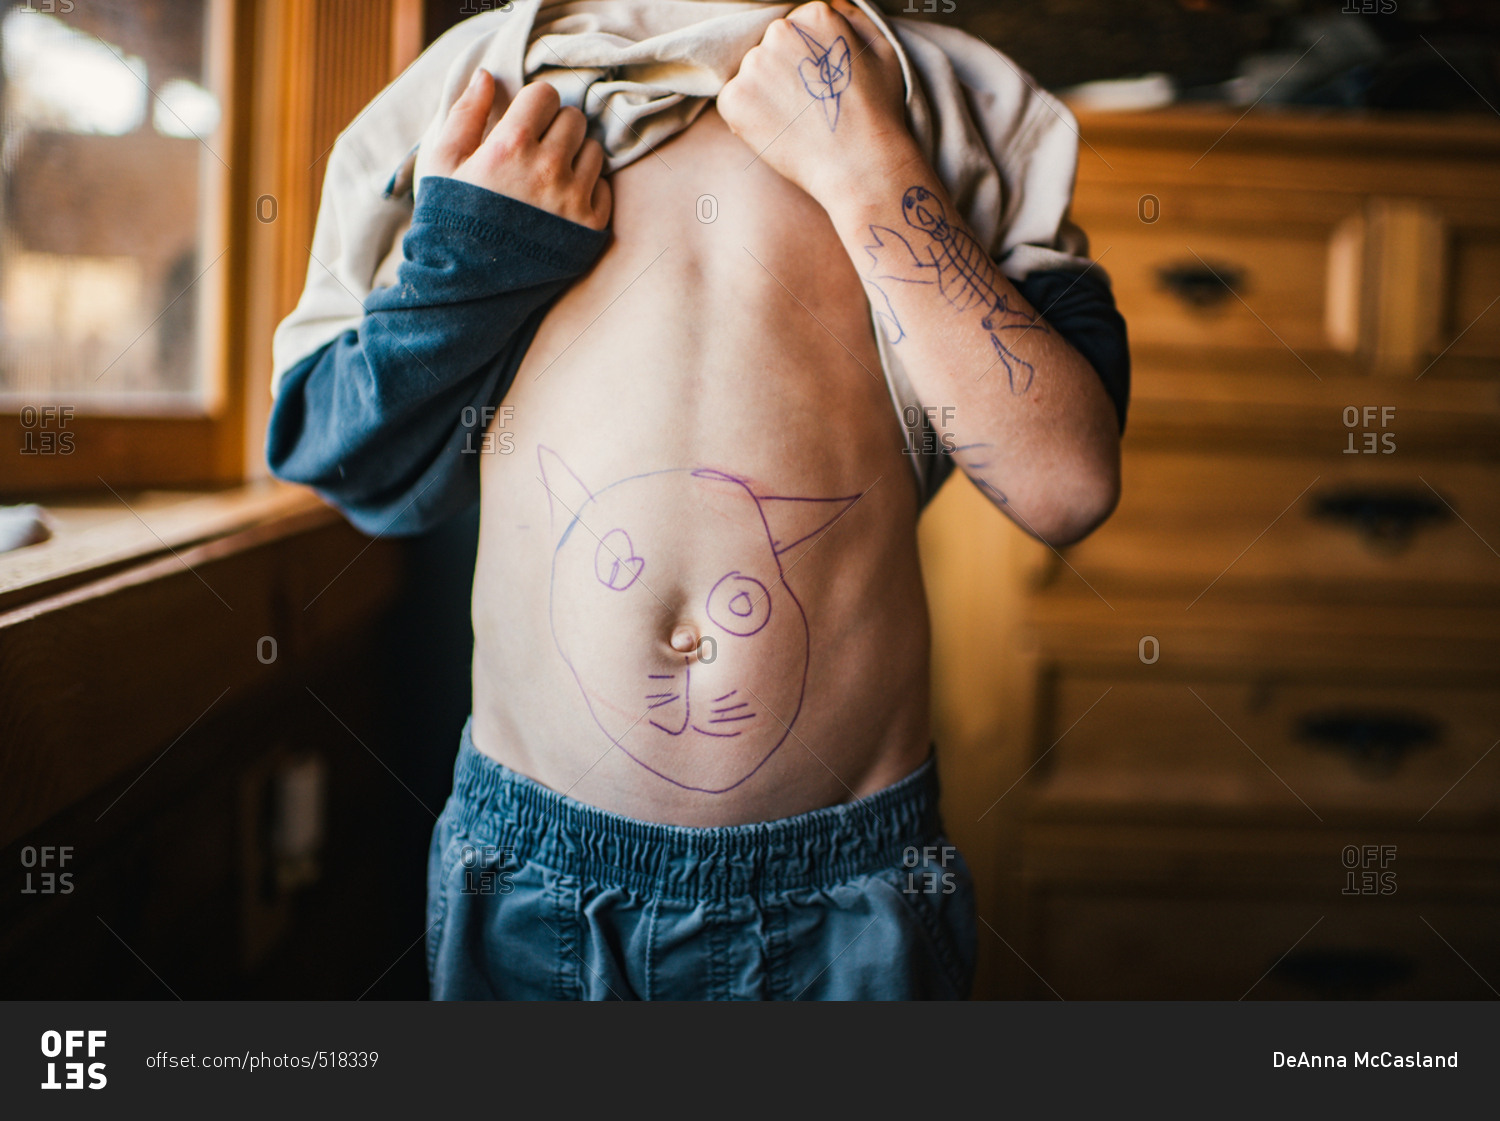 Boy lifting shirt to show cat drawing on his stomach